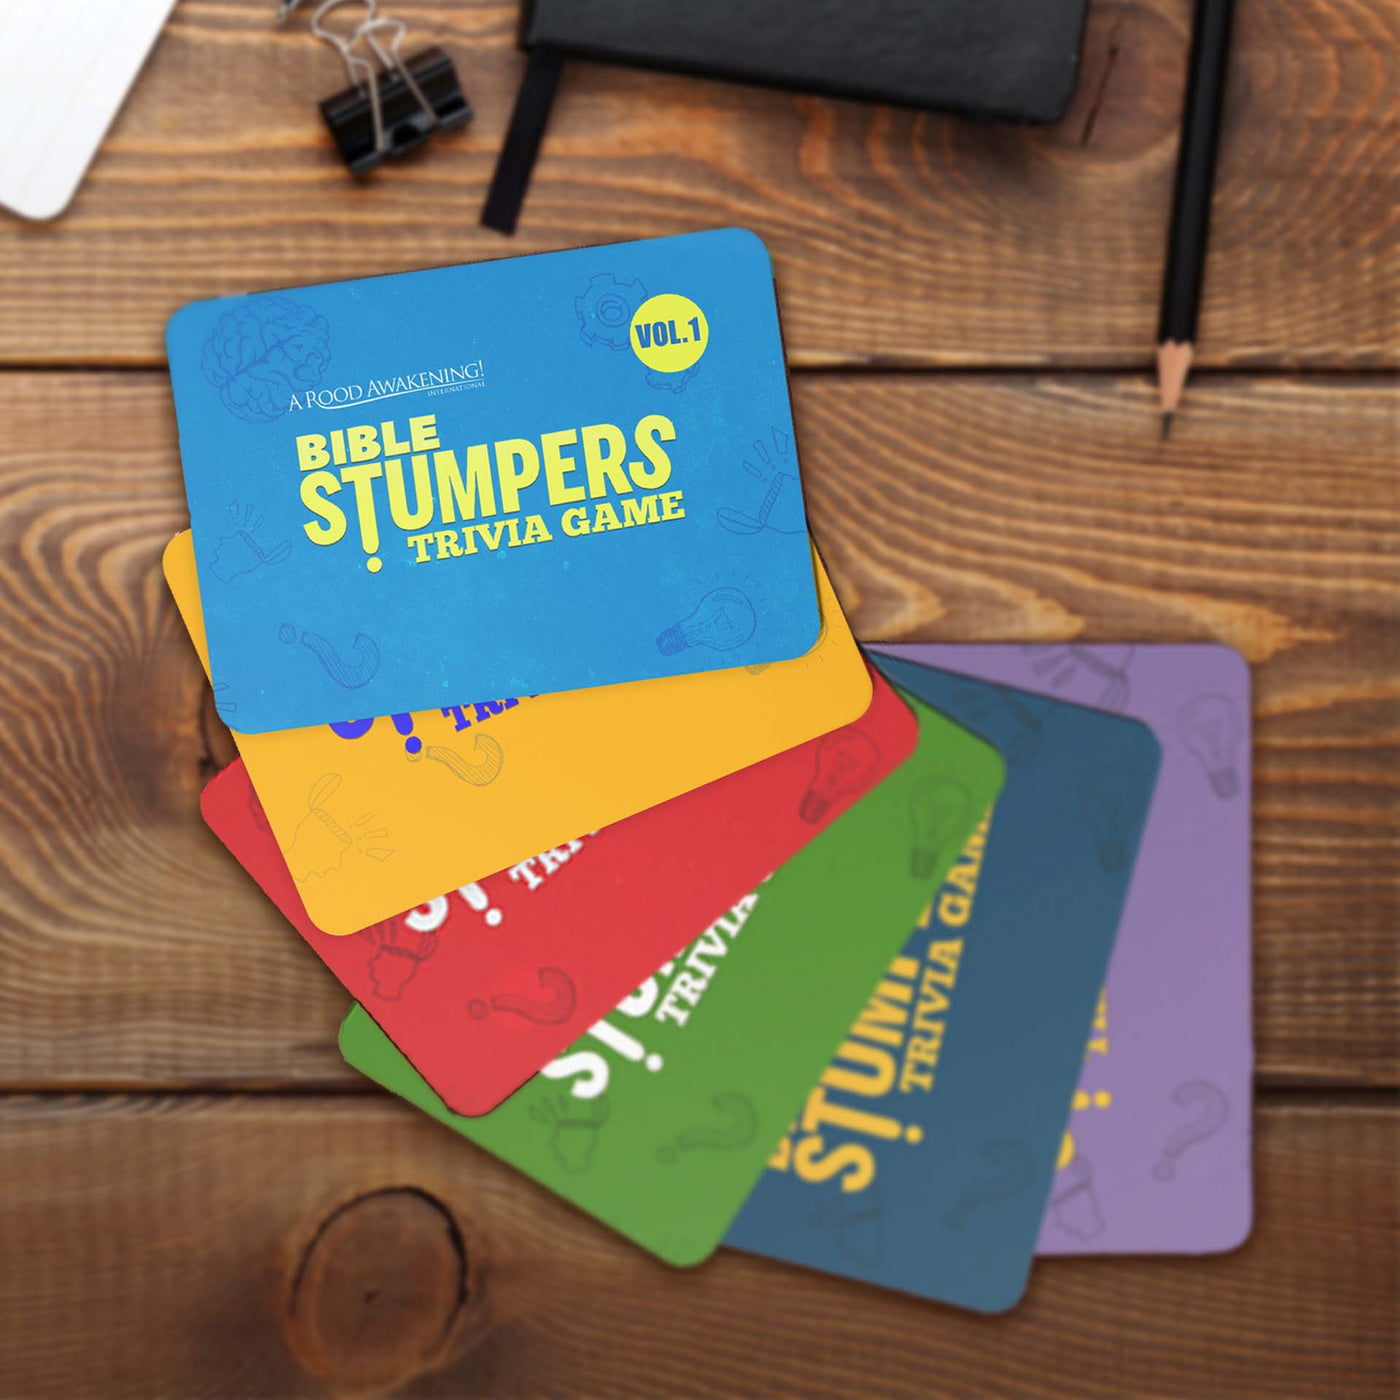 Bible Stumpers Trivia Game - ALL 6 VOLUMES (SAVE 20%)